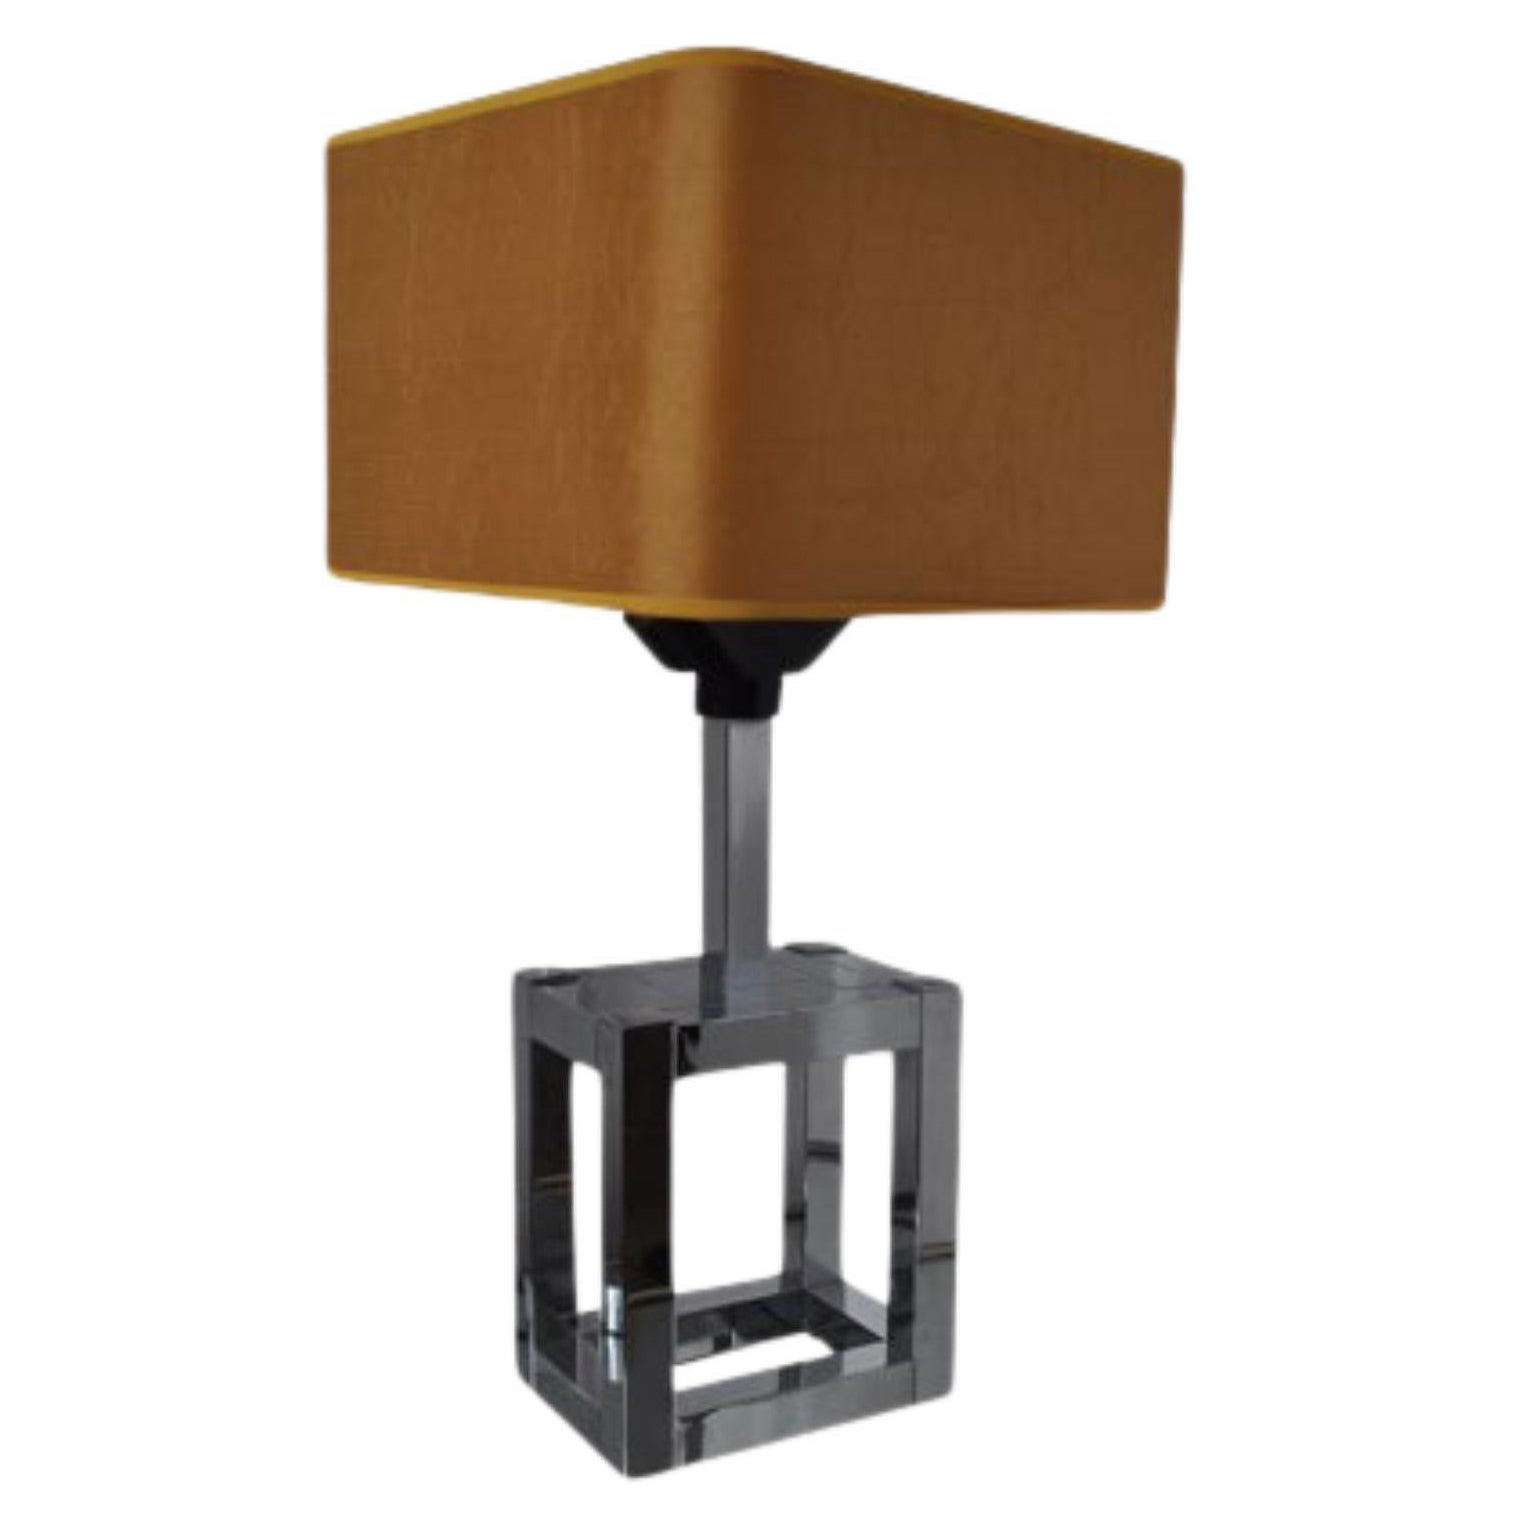 1970 Willy Rizzo Cubic Table Lamp for Lumica, Italy For Sale